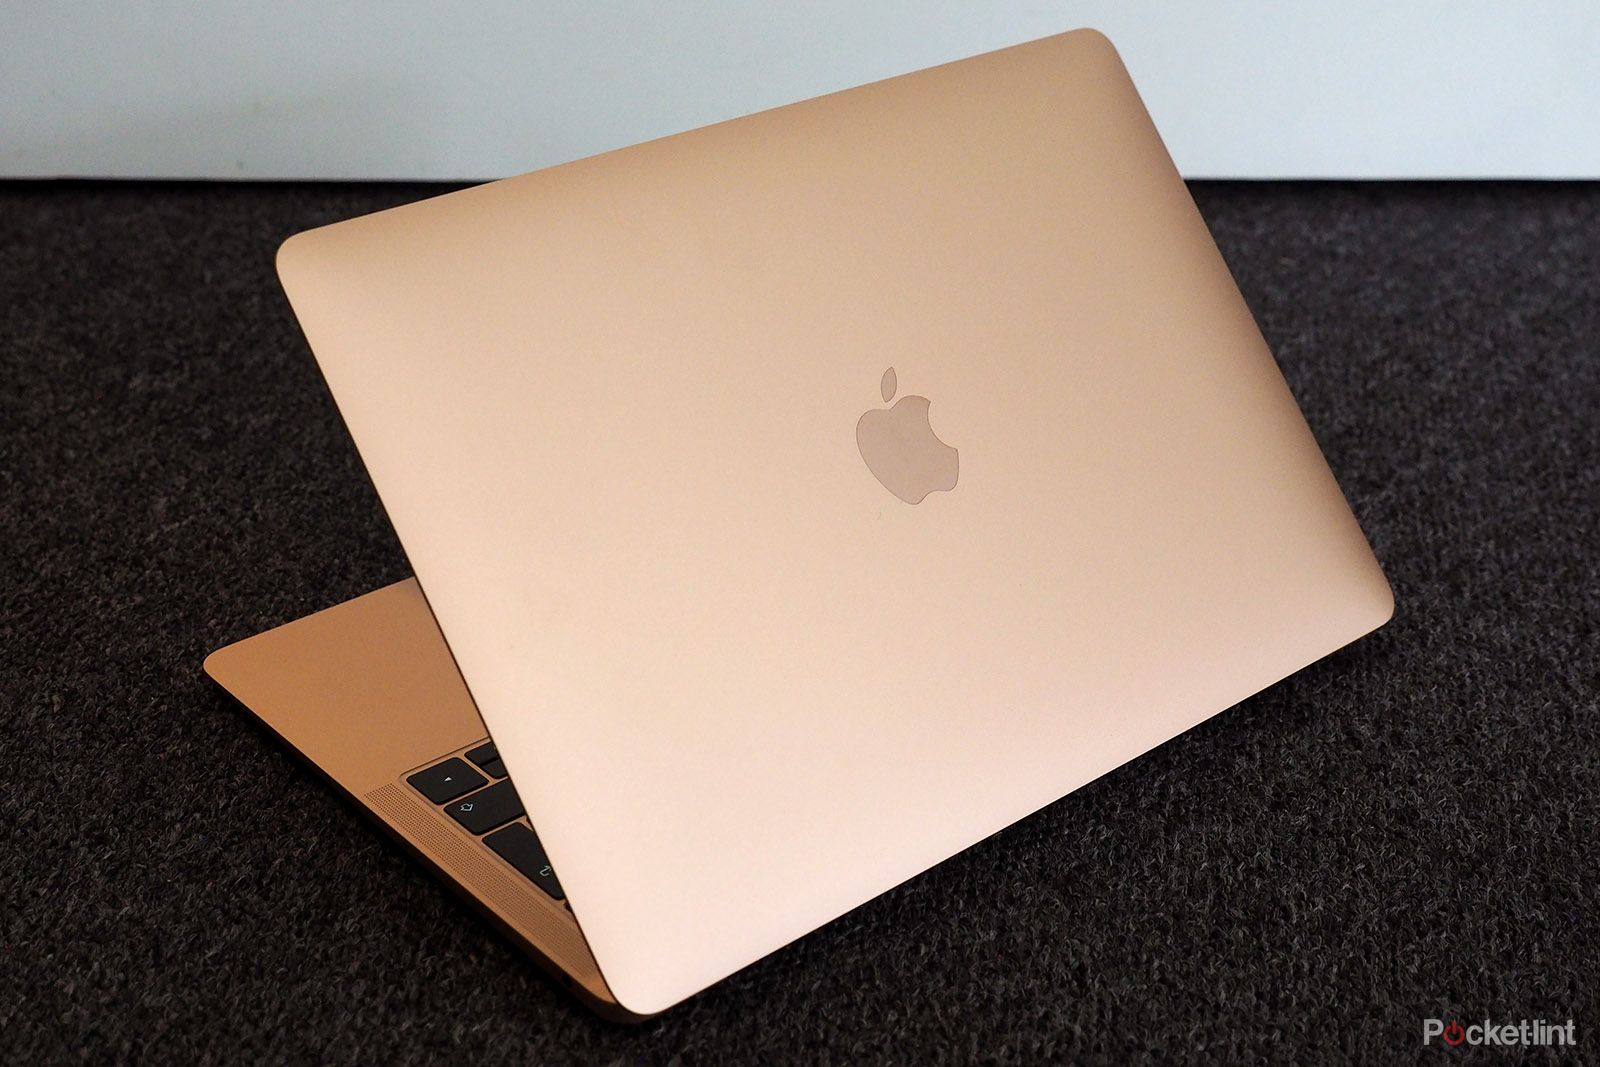 MacBook Air 2020 vs 2019: What's the difference?